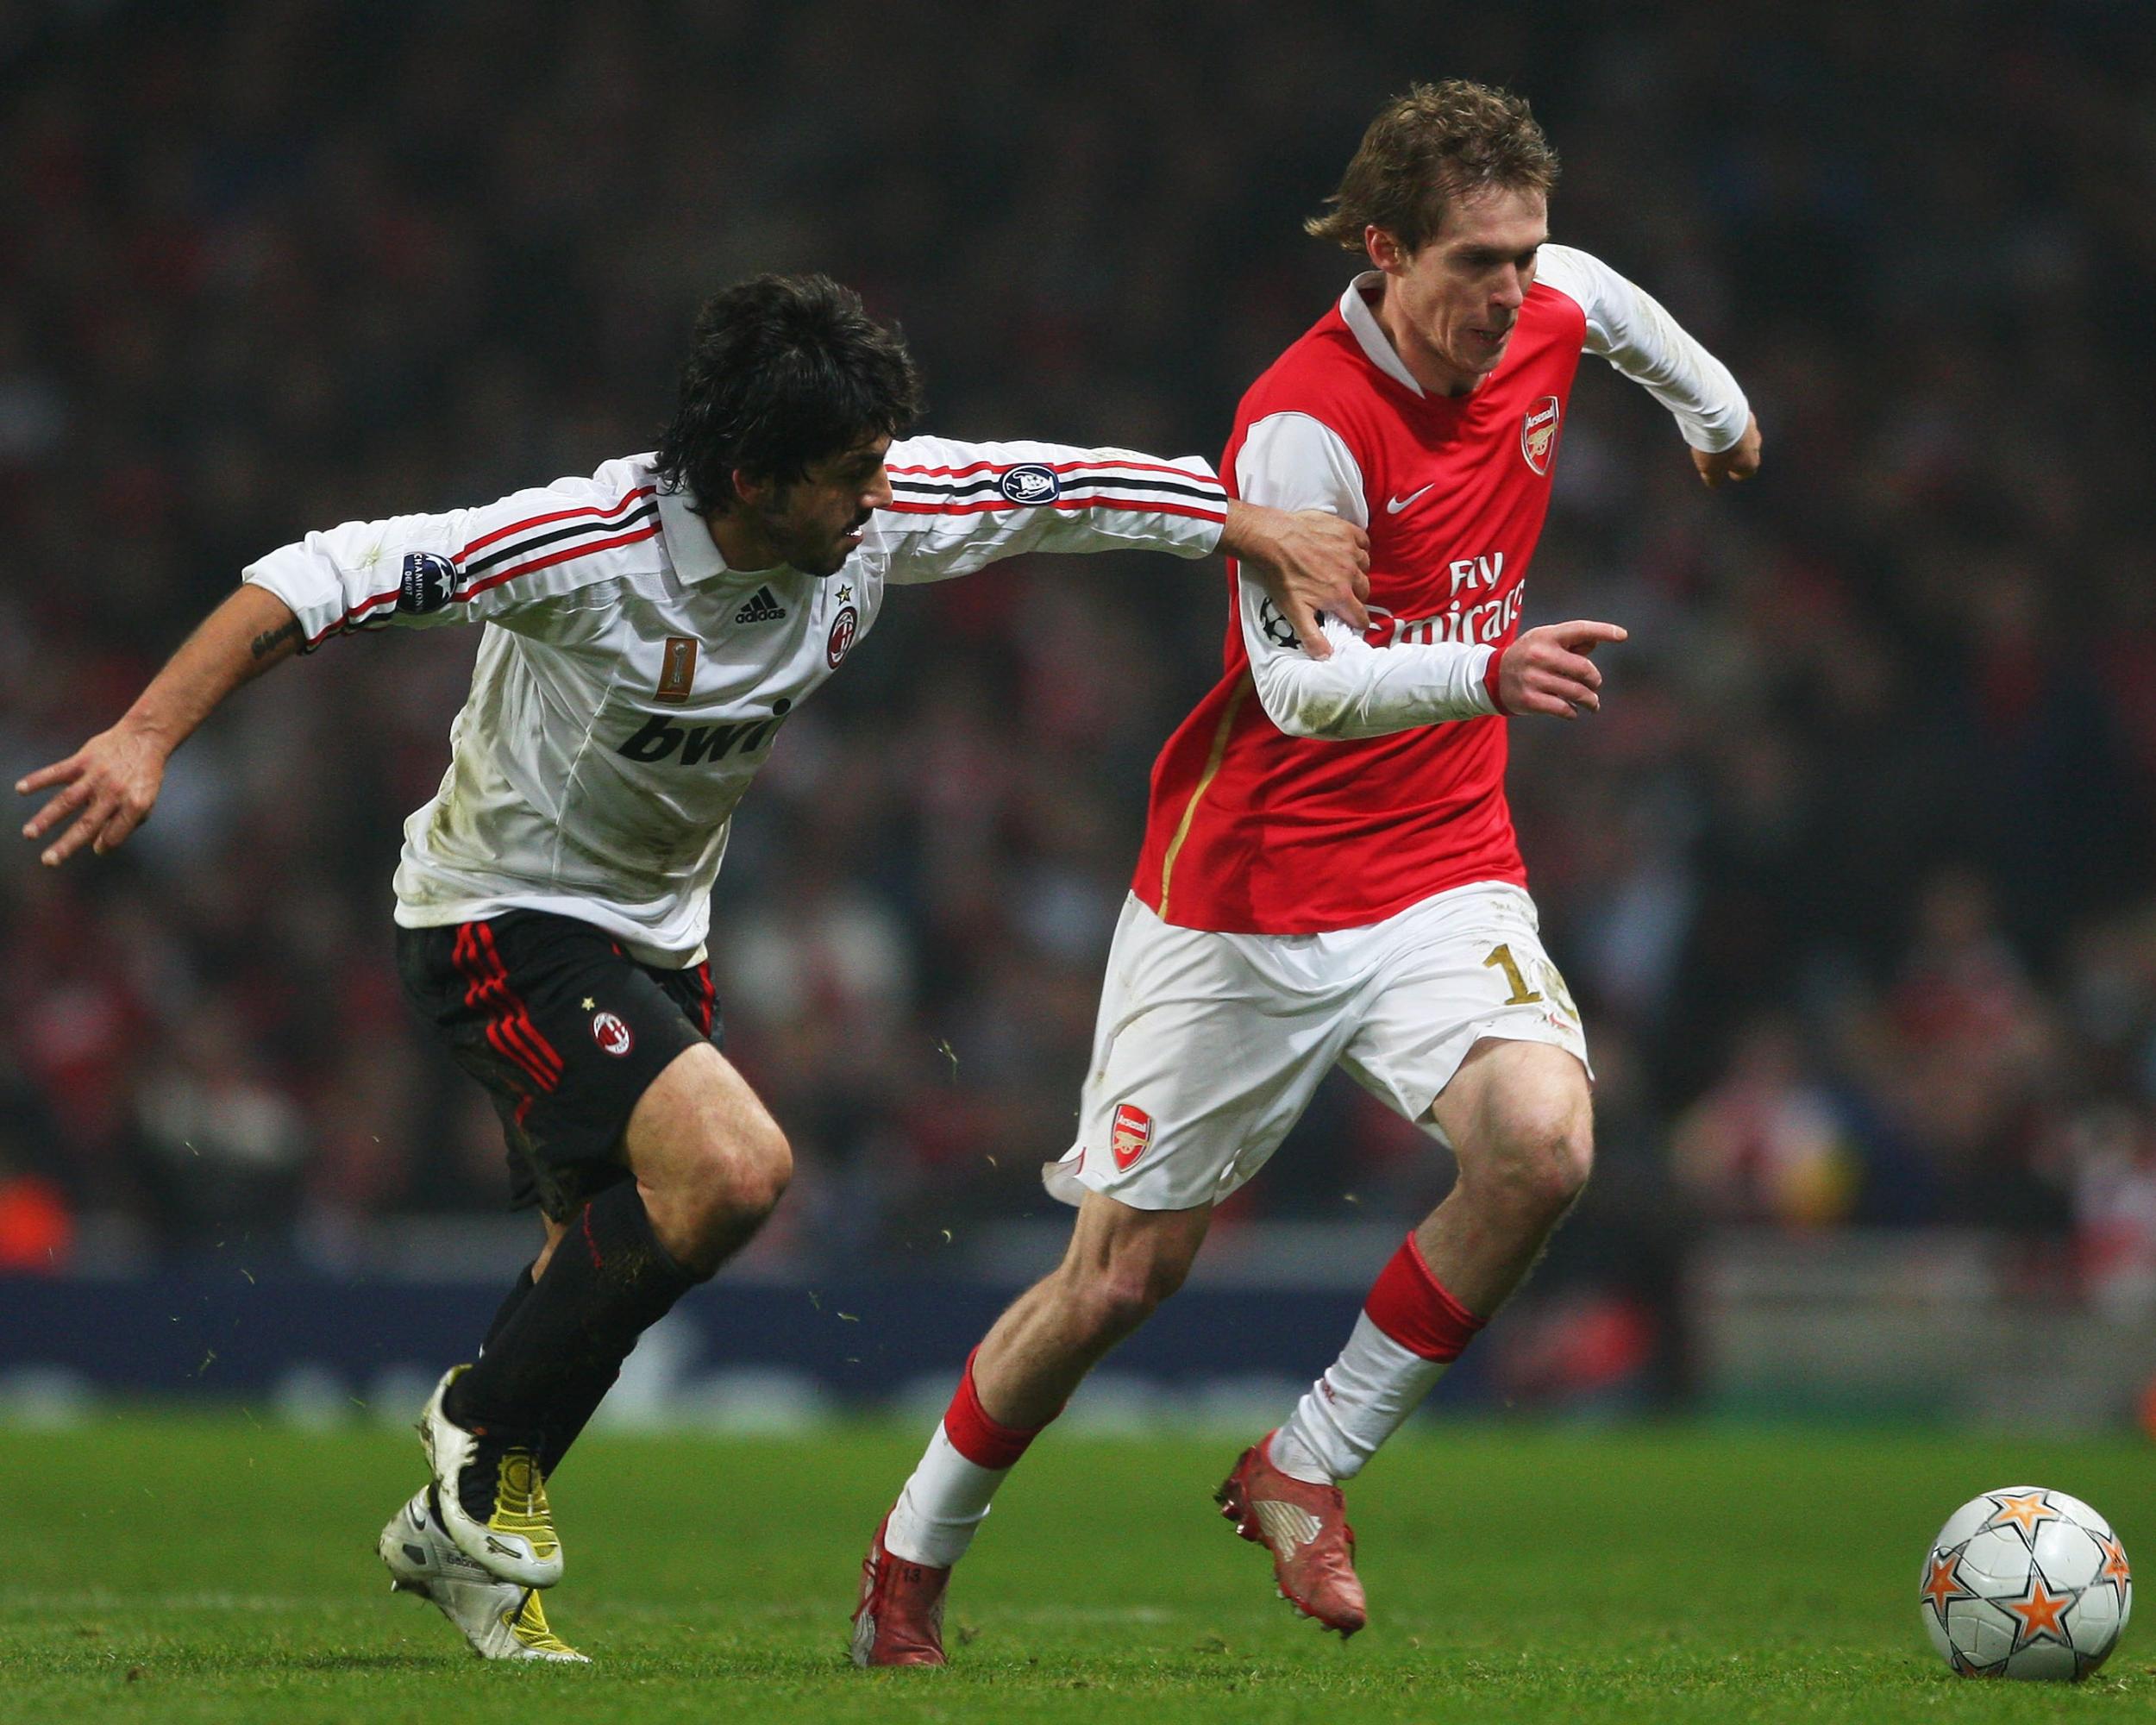 Hleb played for the Gunners in the Champions League